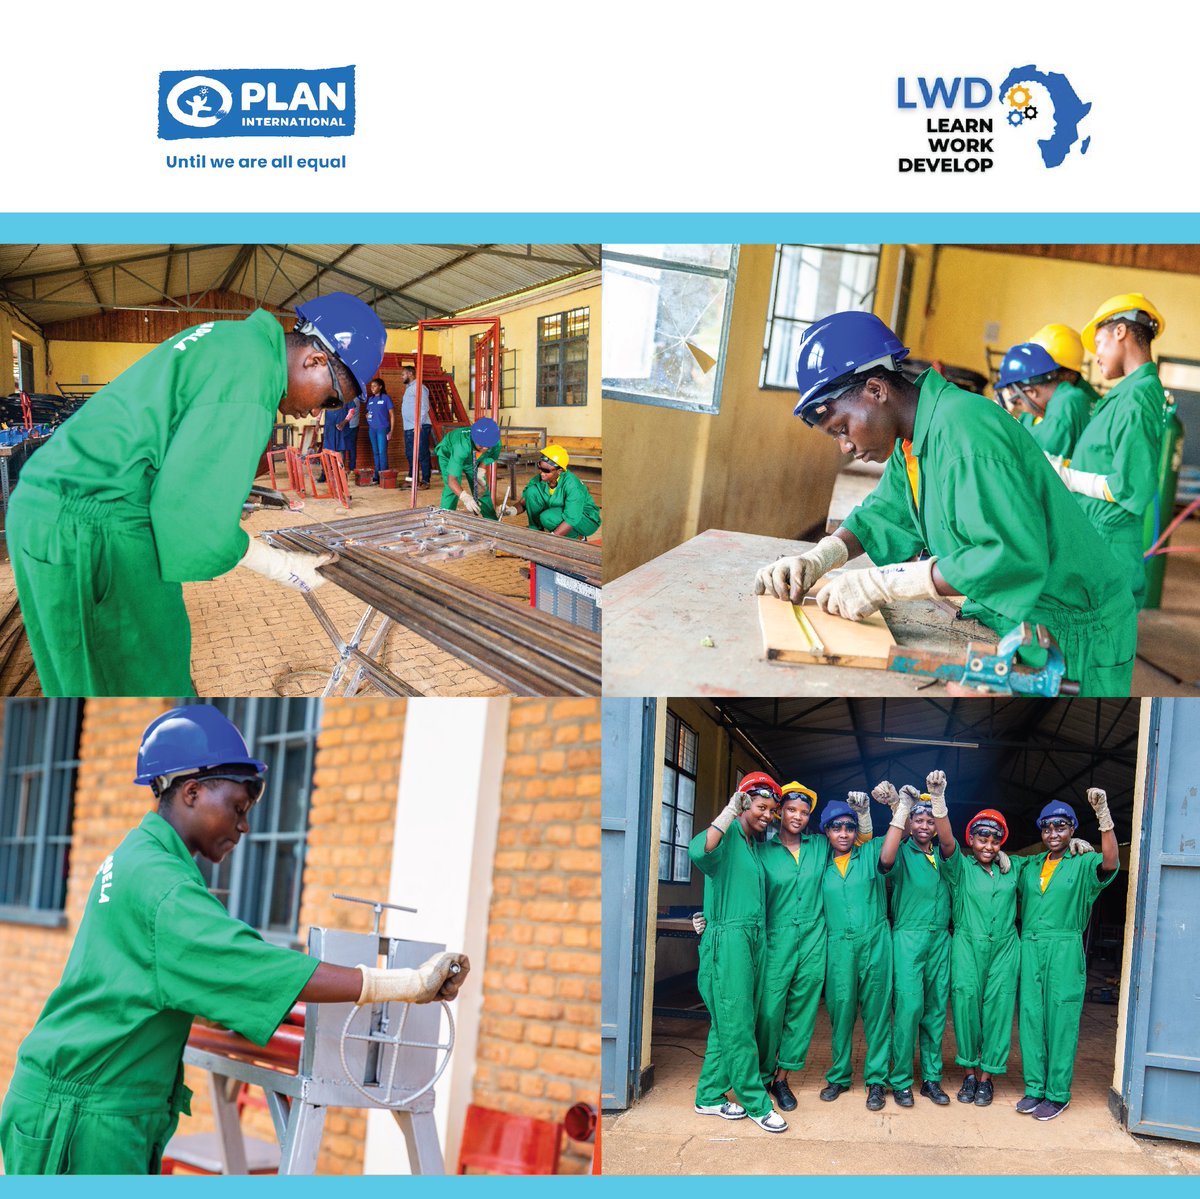 “One of my goals is to prove that girls are indeed innovators. Given opportunities in various sectors, girls can achieve their dreams & greatness. I am confident that I'll accomplish even more in welding.” - Denyse, 21. #BeatTheClock #UntilWeAreAllEqual bit.ly/3JwouNp